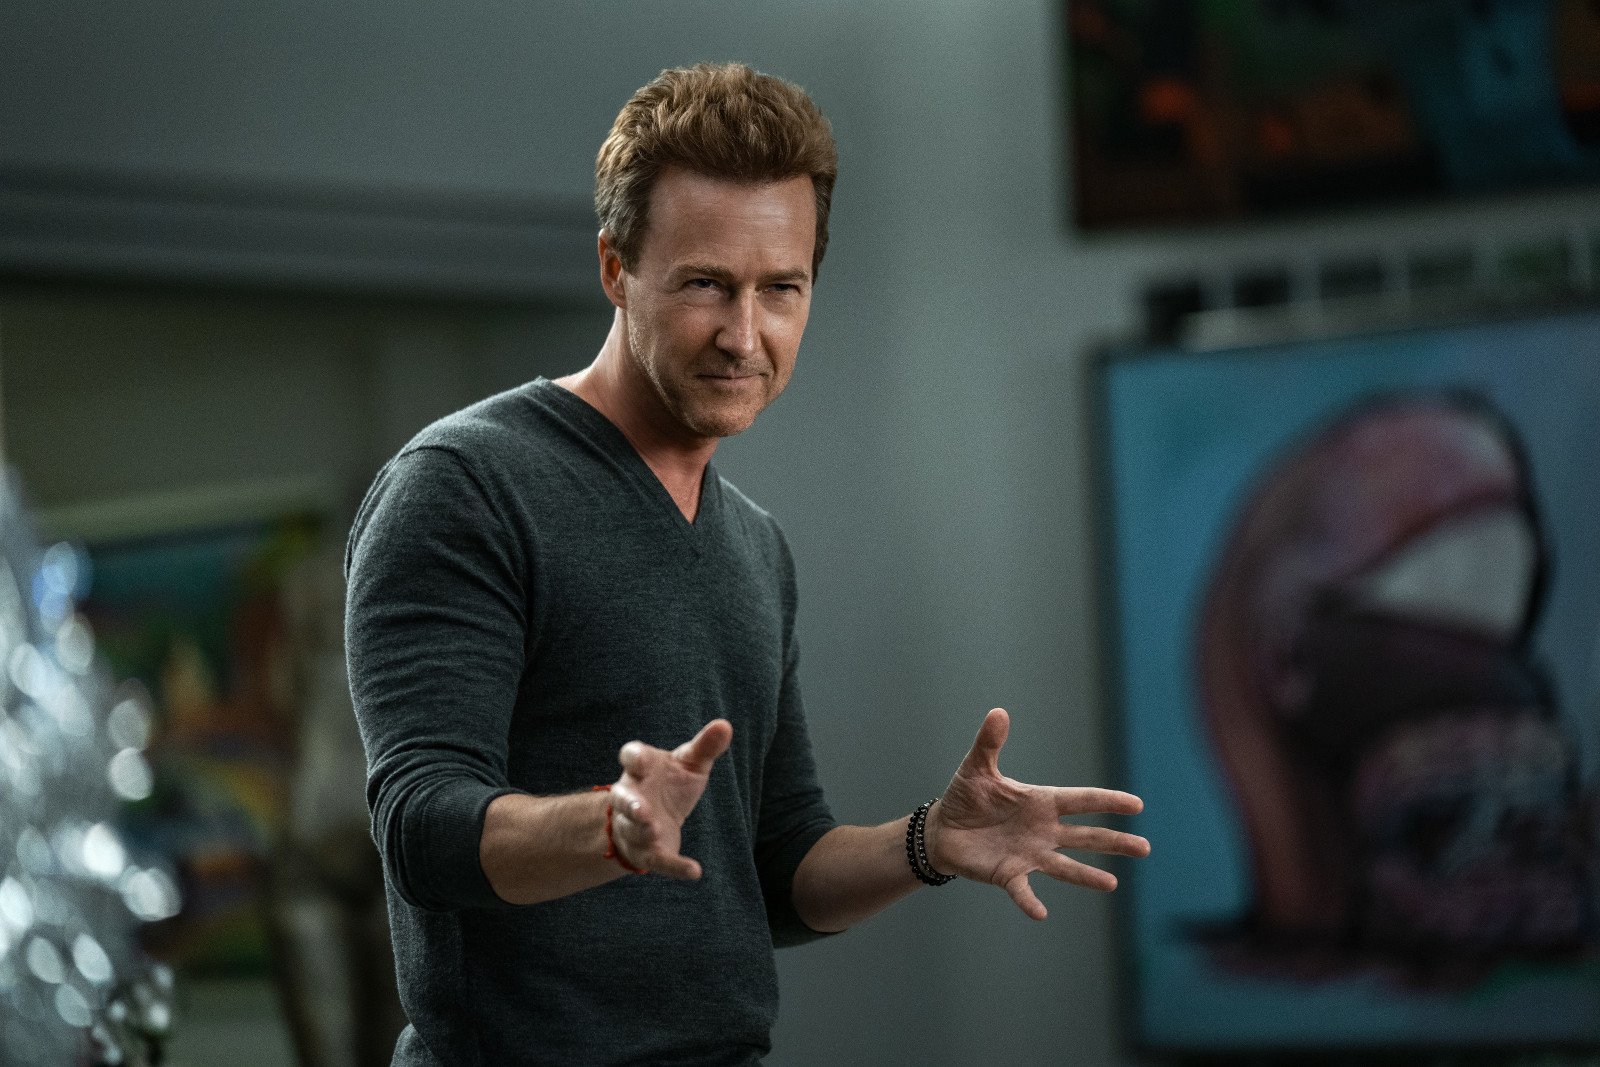 Edward Norton as Miles Bron in 'Glass Onion' for our article about its ending. He's wearing a grey, long-sleeved shirt and holding his hands out.